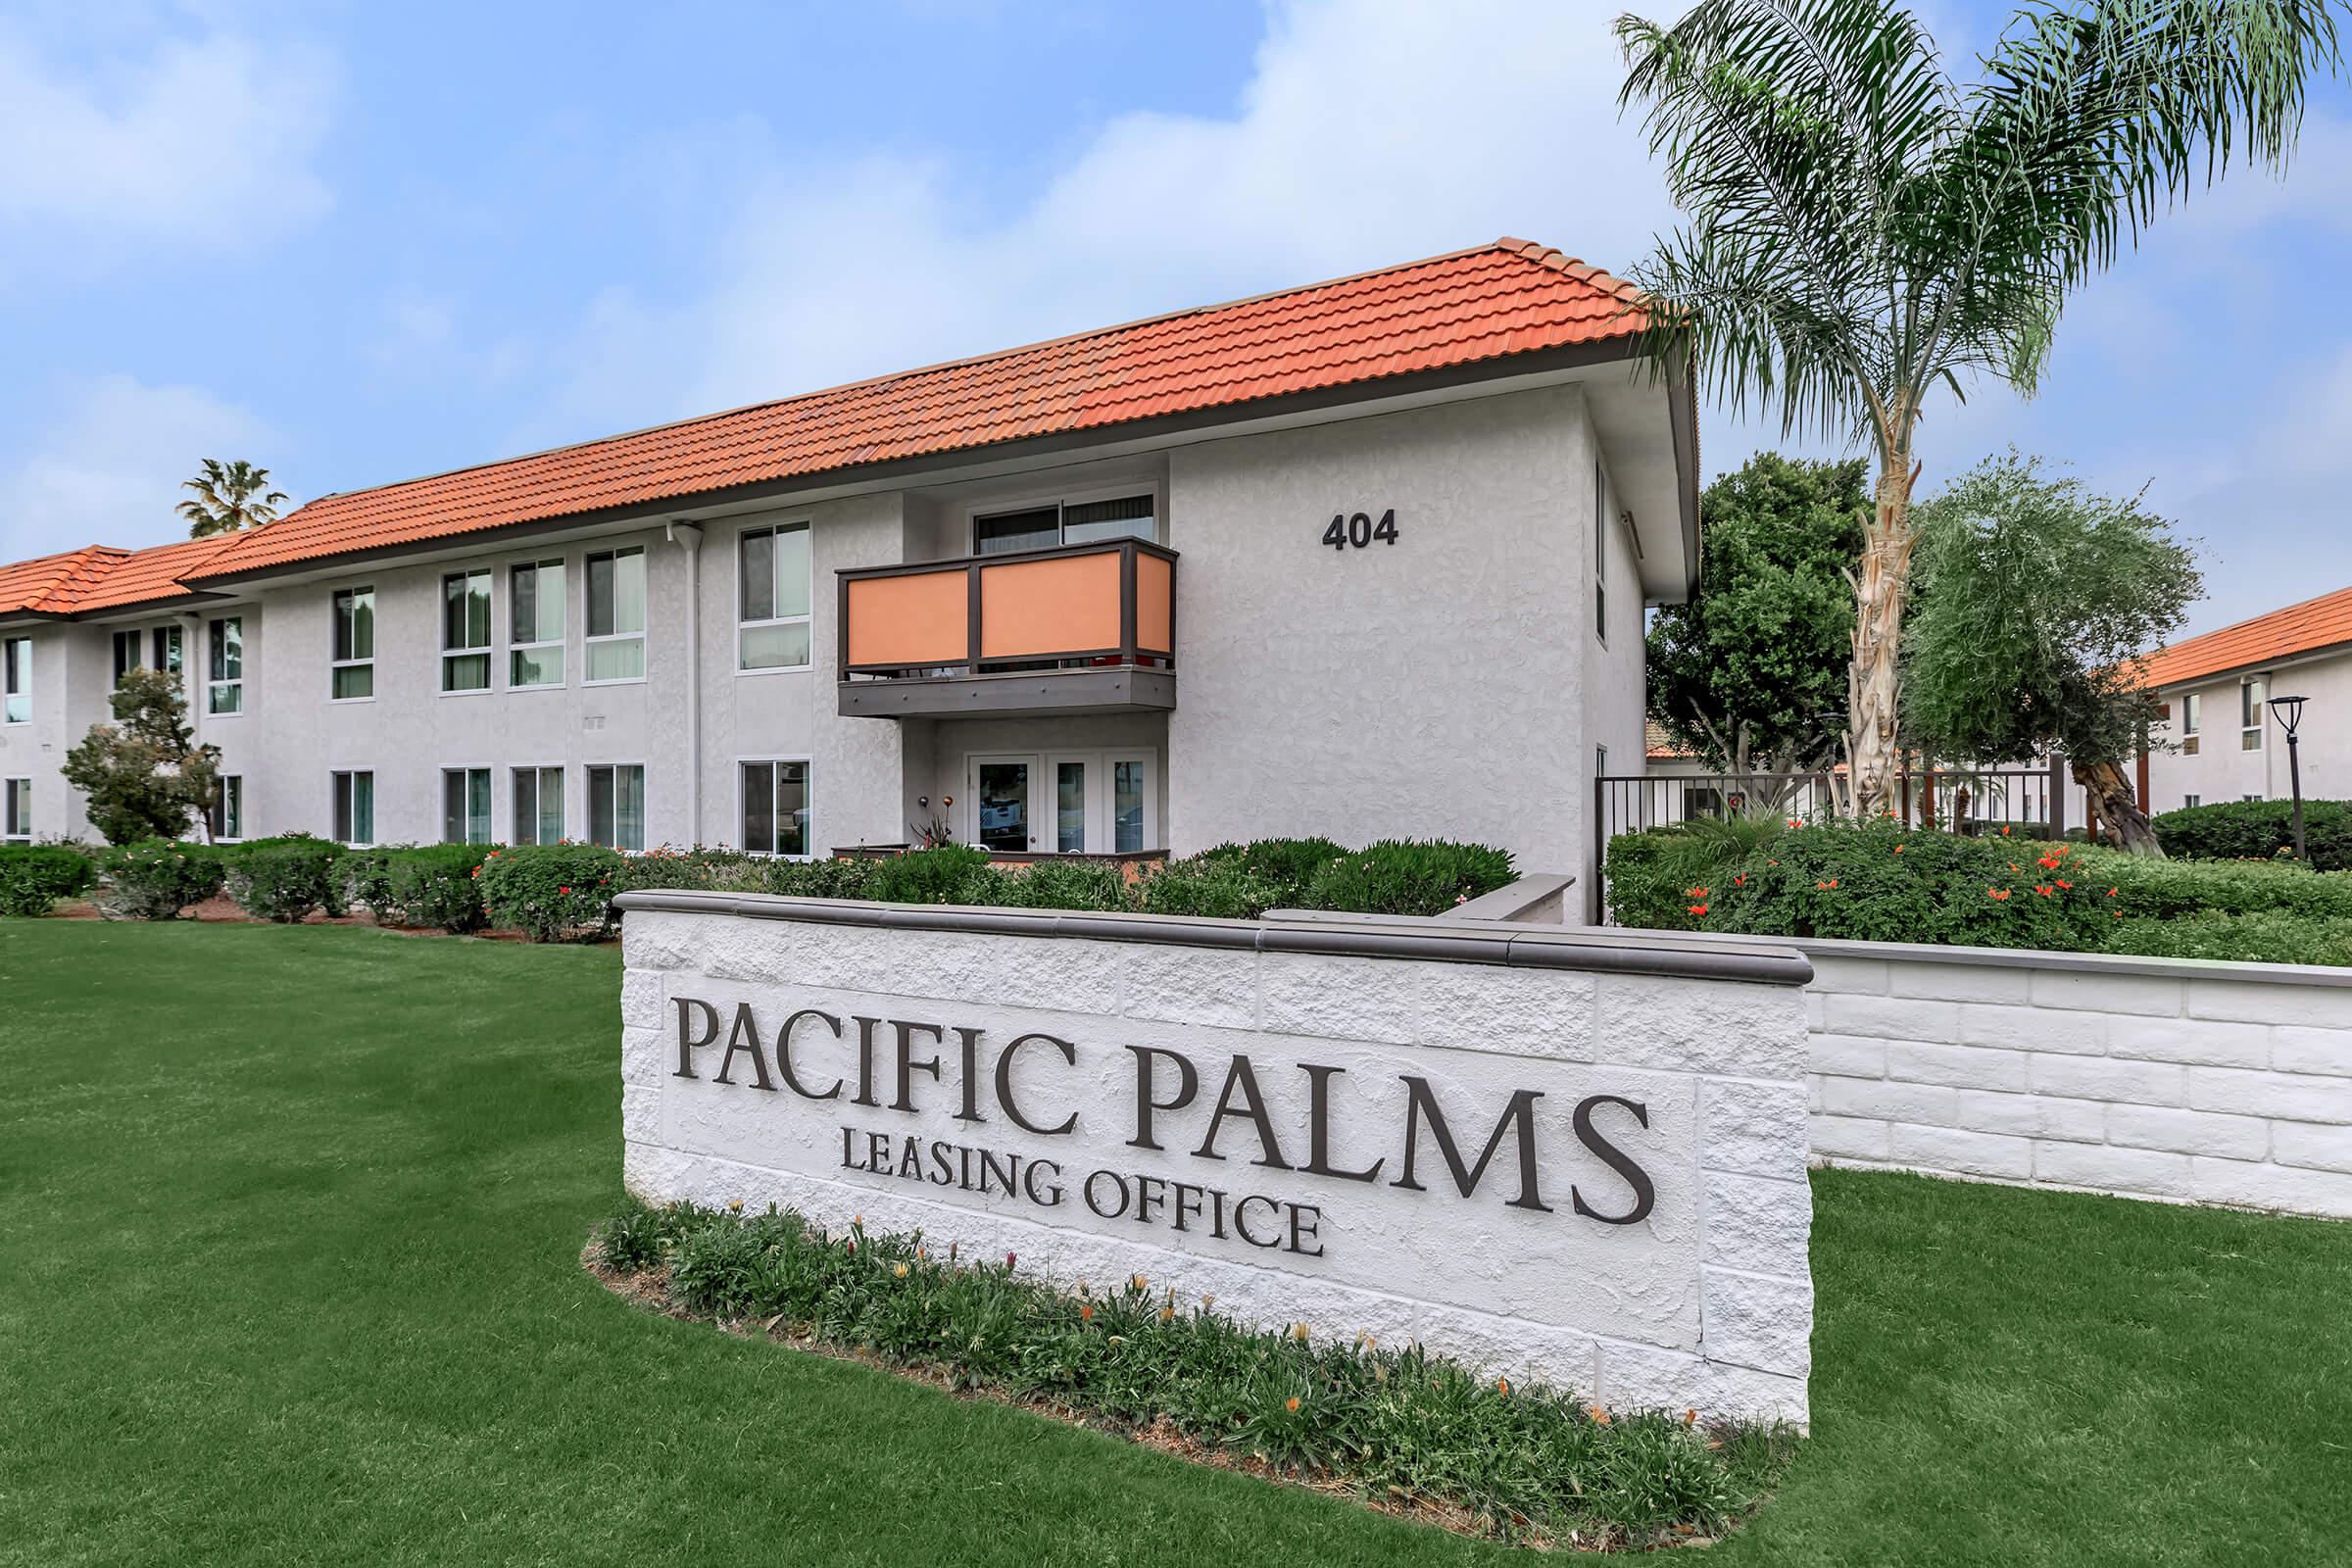 Pacific Palms monument sign